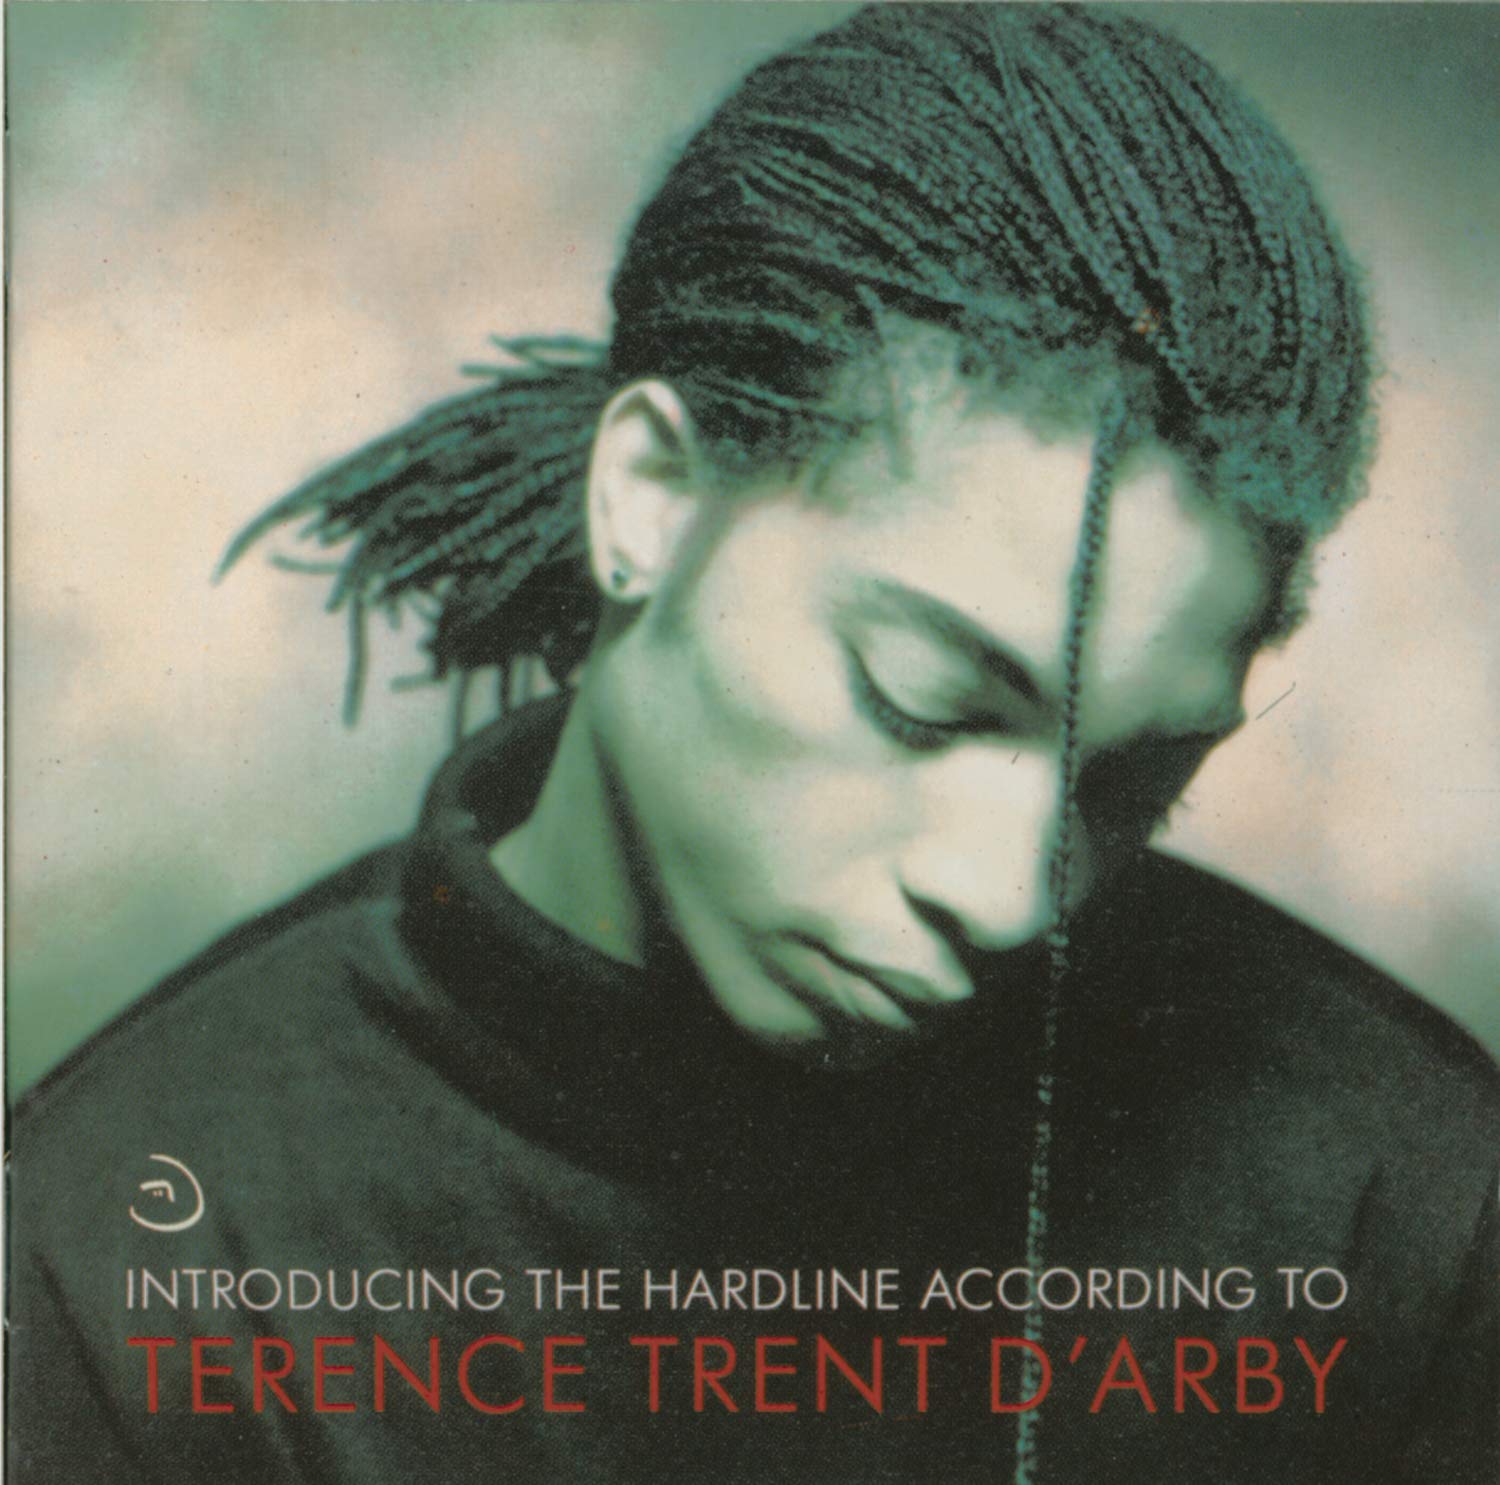 Terence Trent DArby-Introducing The Hardline According To Terence Trent DArby-CD-FLAC-1987-THEVOiD